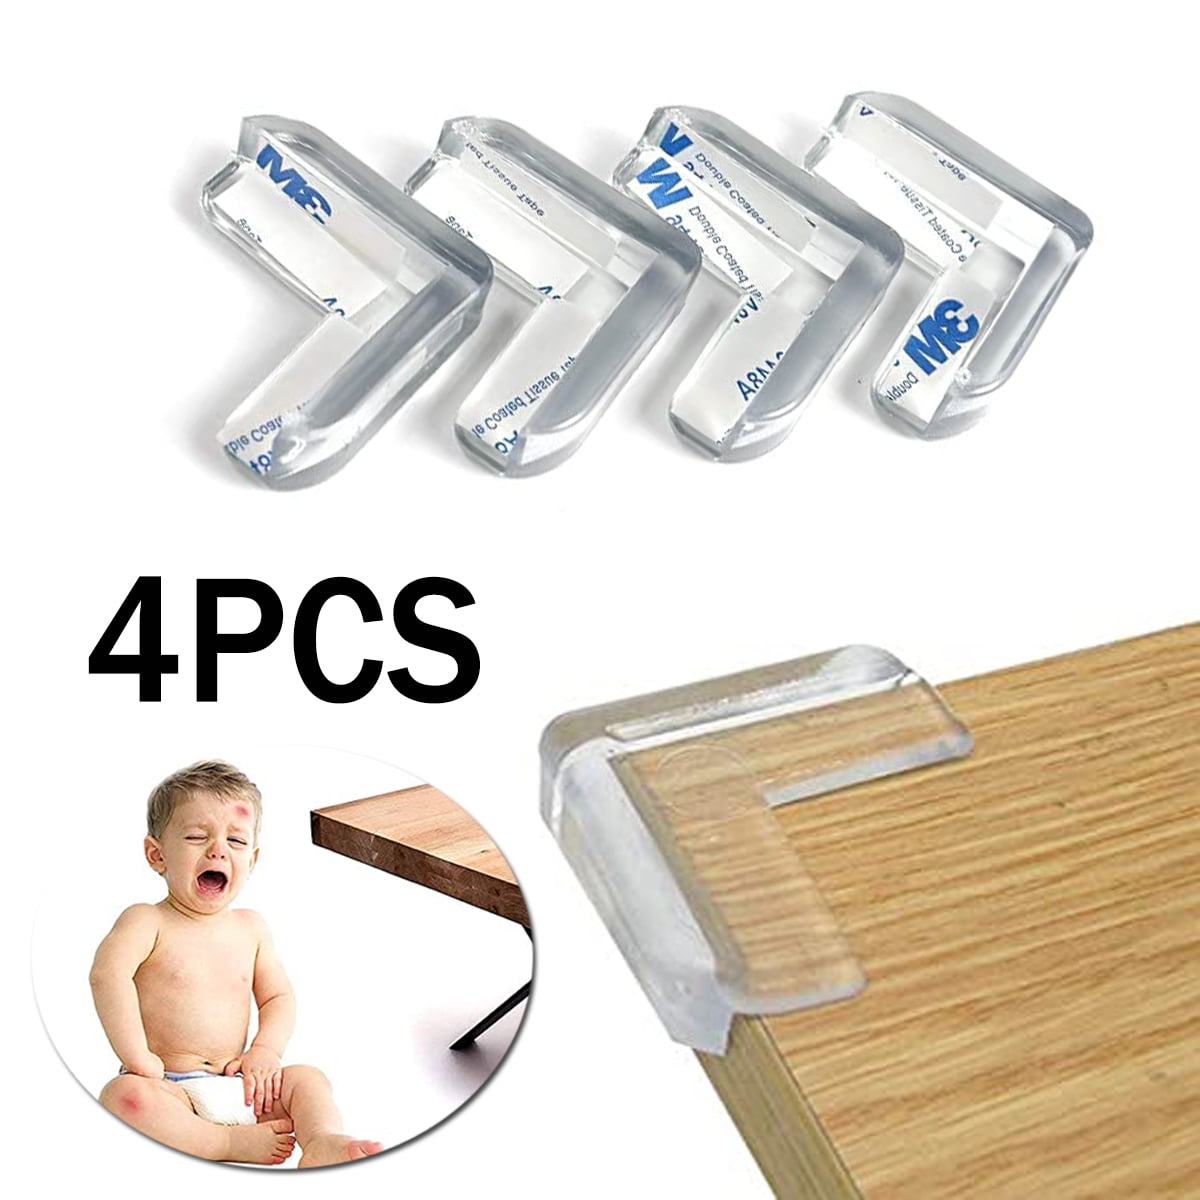 12(pcs) Silicone Table Corner Protector For Kids Safety Table Corner Covers  For Glass Table - Baby Safety Equipment, HomeifyStore